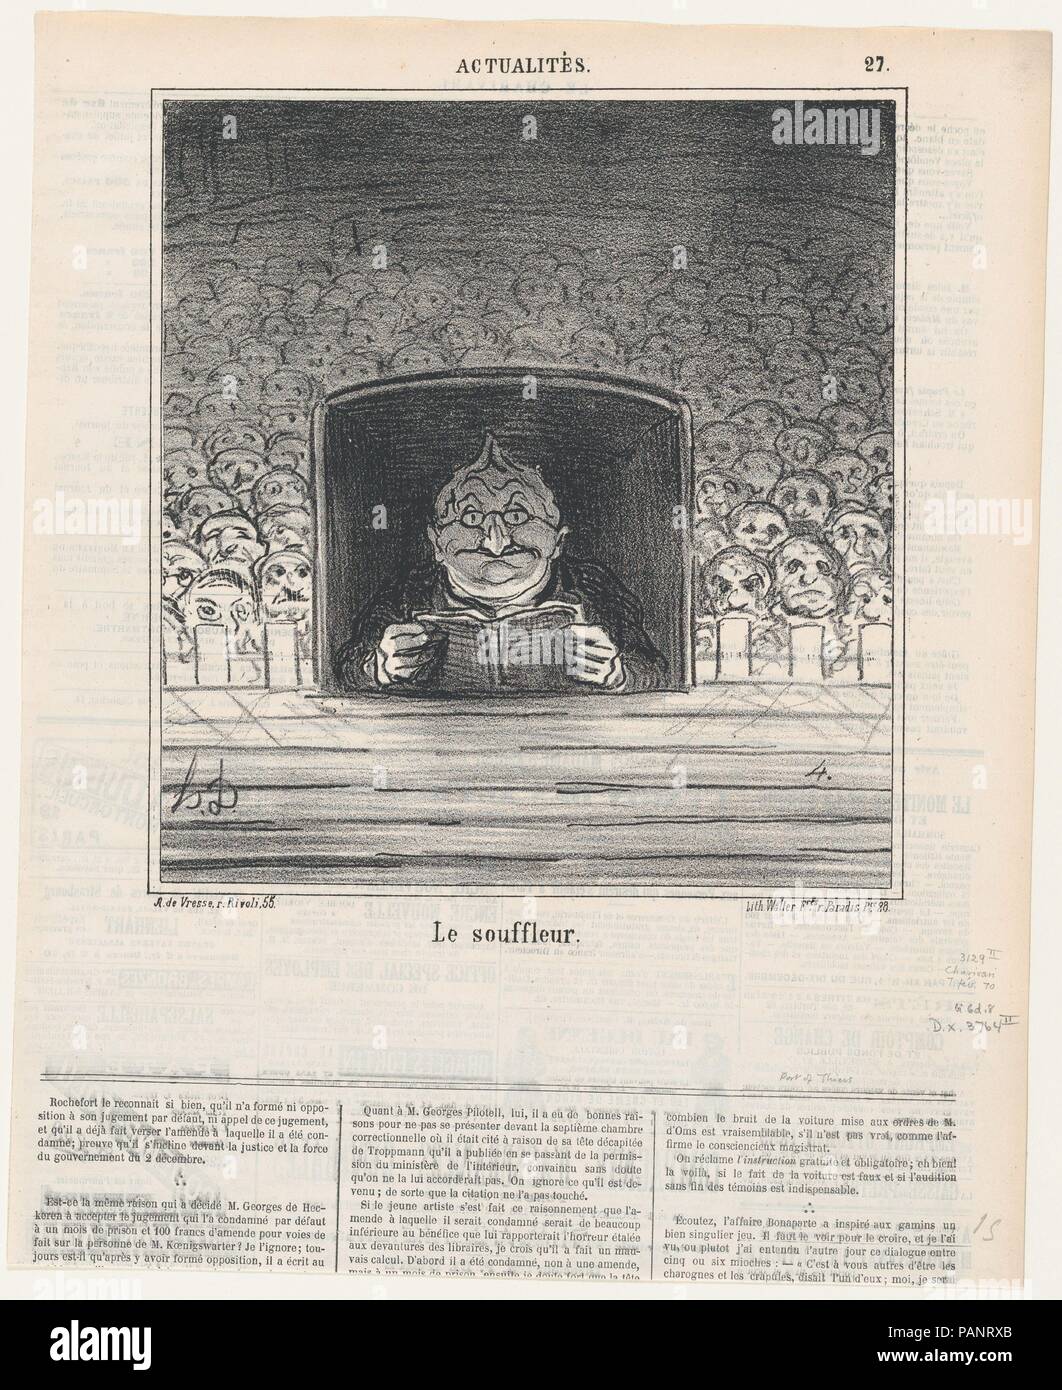 The prompter, from 'News of the day,' published in Le Charivari, February 7, 1870. Artist: Honoré Daumier (French, Marseilles 1808-1879 Valmondois). Dimensions: Image: 8 11/16 × 8 1/16 in. (22 × 20.4 cm)  Sheet: 13 13/16 × 11 3/16 in. (35.1 × 28.4 cm). Printer: Destouches (Paris). Publisher: Arnaud de Vresse. Series/Portfolio: 'News of the day' (Actualités). Subject: Marie Joseph Louis Adolphe Thiers (French, Marseille 1797-1877 Saint-Germain-en-Laye). Date: February 7, 1870. Museum: Metropolitan Museum of Art, New York, USA. Stock Photo